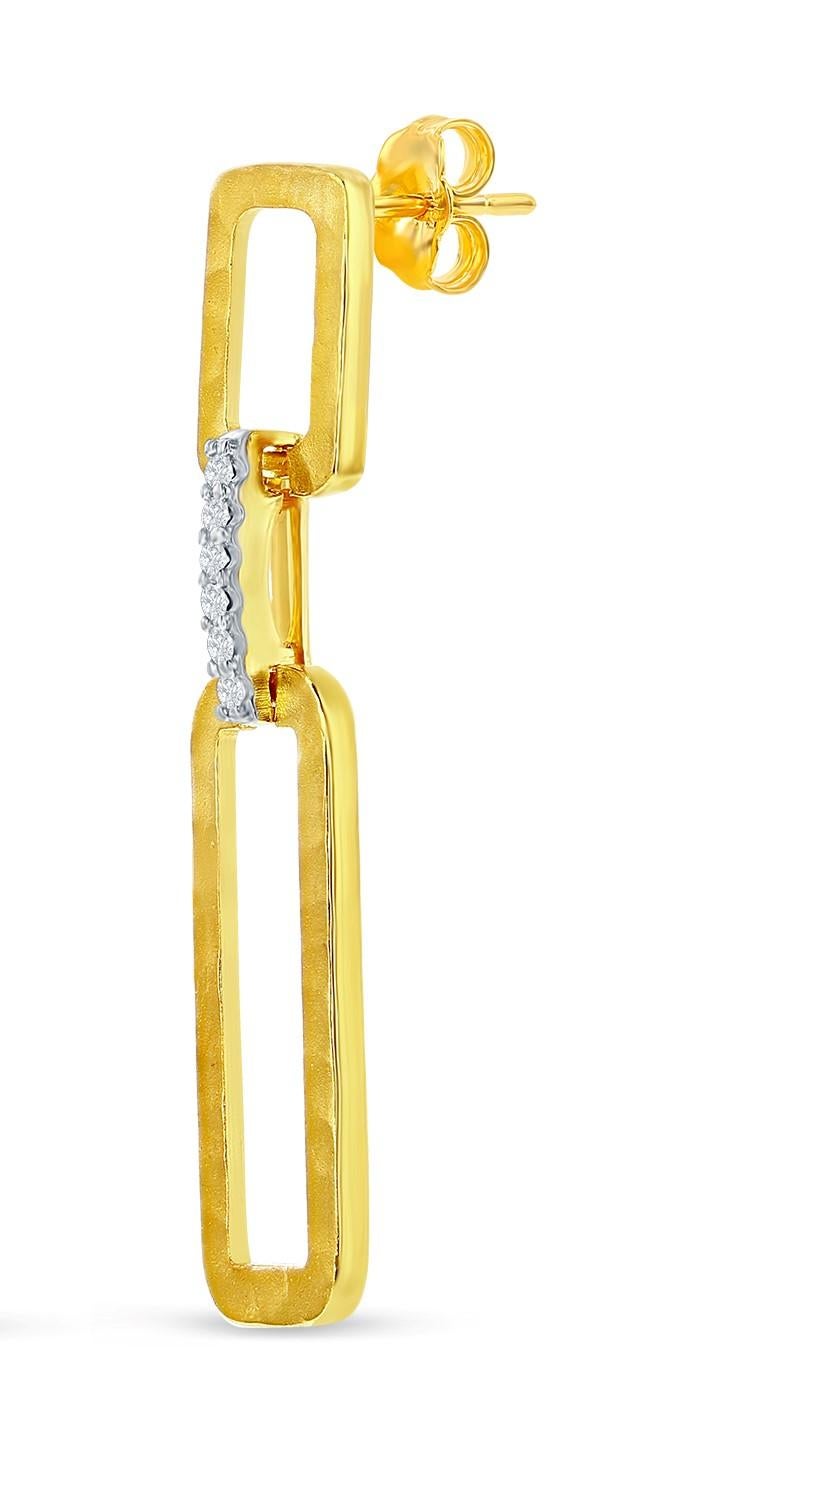 14 Karat Yellow Gold Hand-Crafted Matte and Hammer-Finished Dangling Open Rectangle-Shaped Link Earrings, Accented with 0.07 Carats of Pave Set Diamonds.  Push Back Post Closure.
